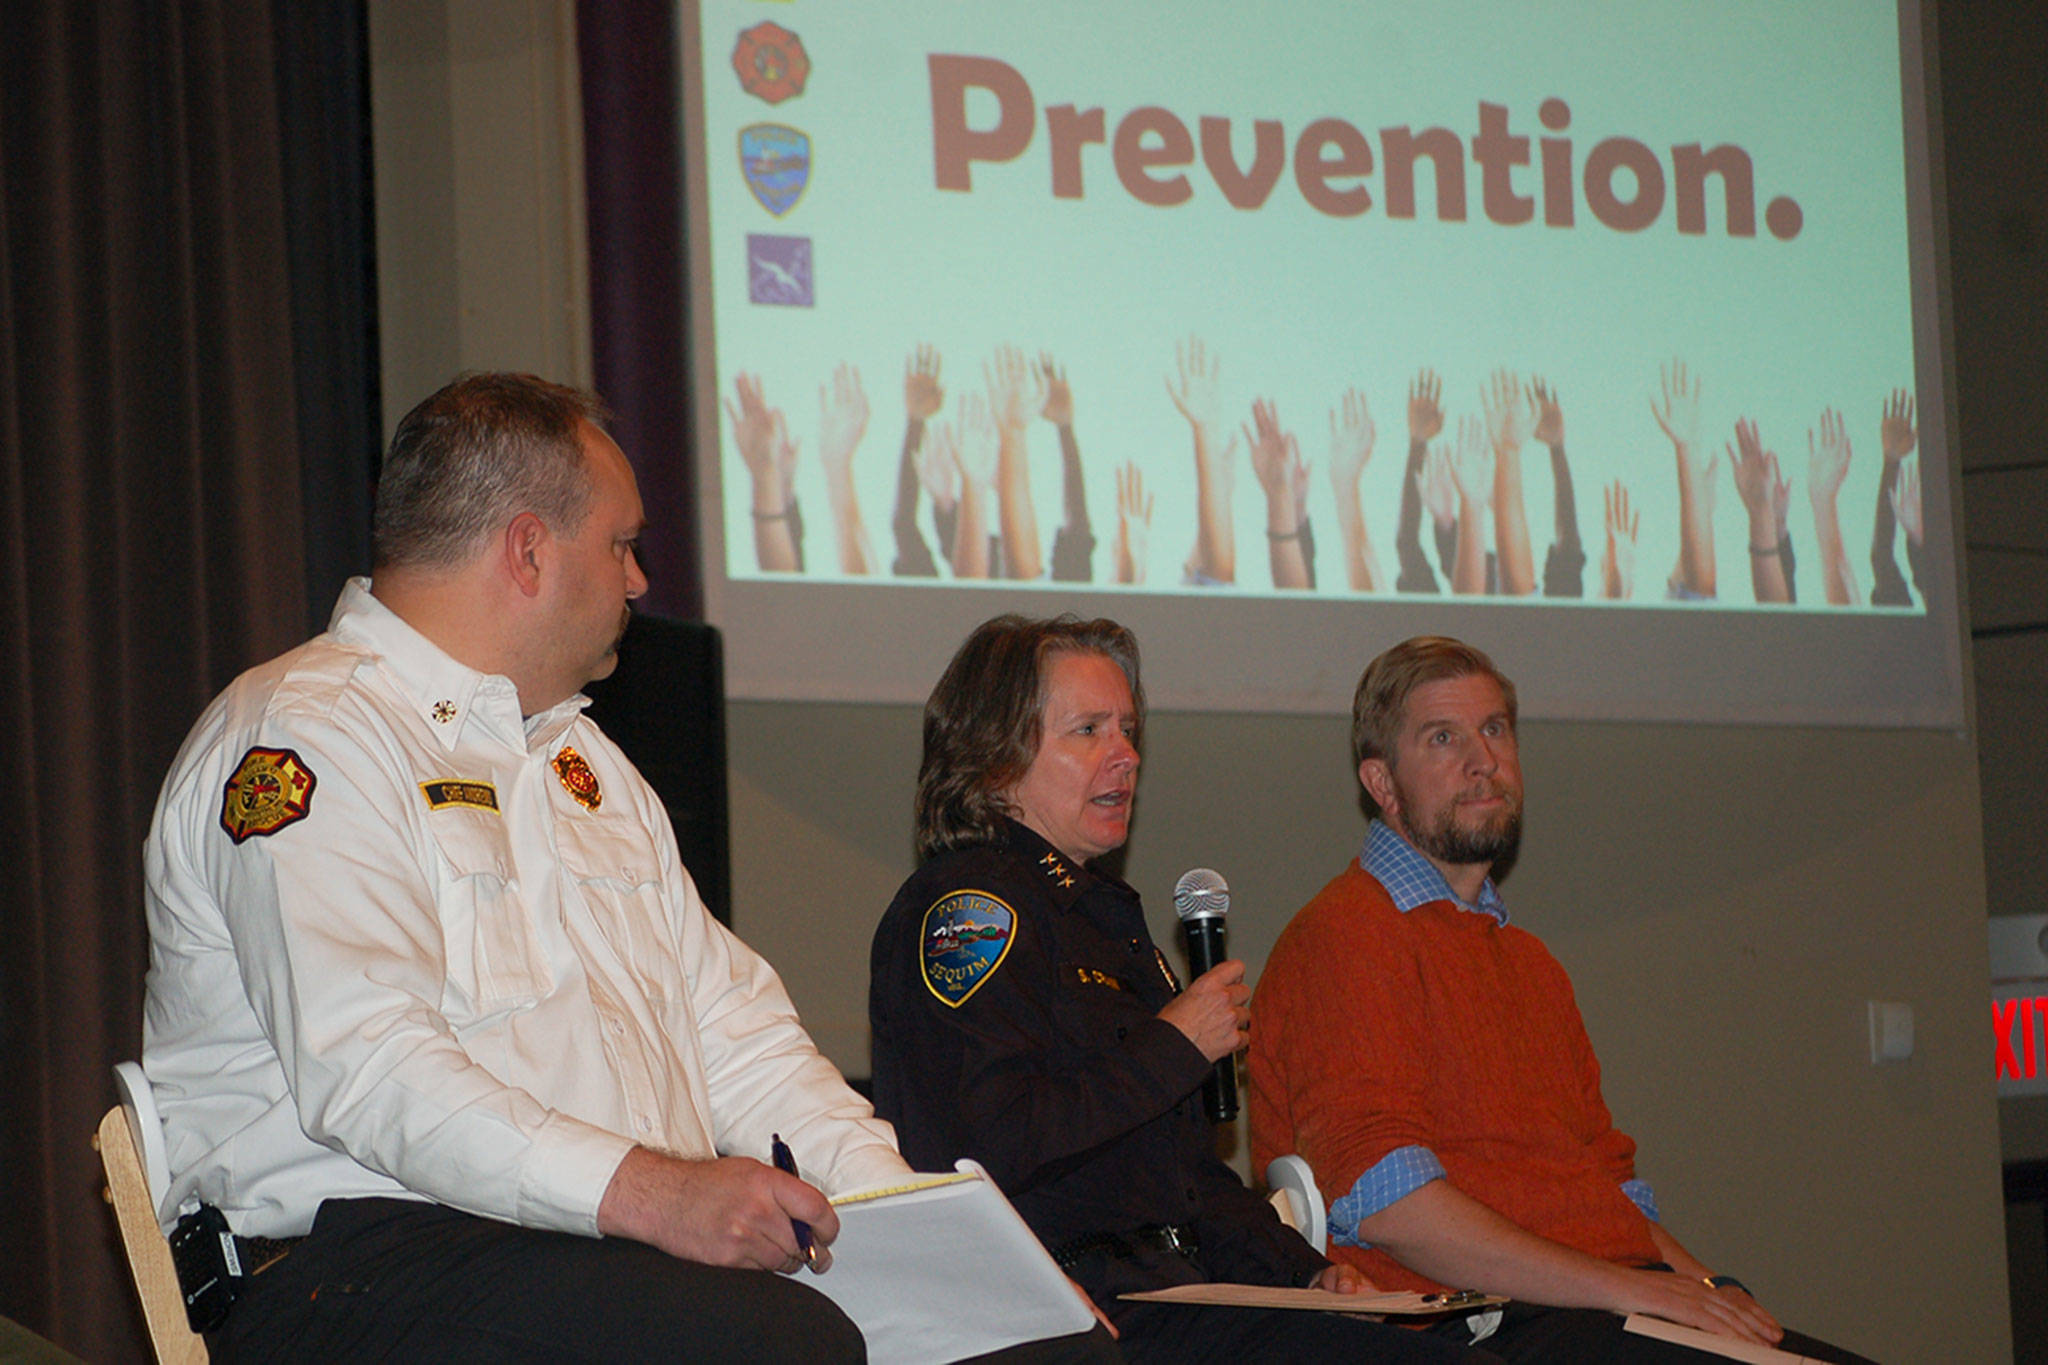 Clallam County Fire District 3 Chief Ben Andrews, left, and City manager Charlie Bush, right, listen as Sequim Police Chief Sheri Crain discusses how the police department tackles prevention methods for community emergencies. Sequim Gazette photo by Erin Hawkins